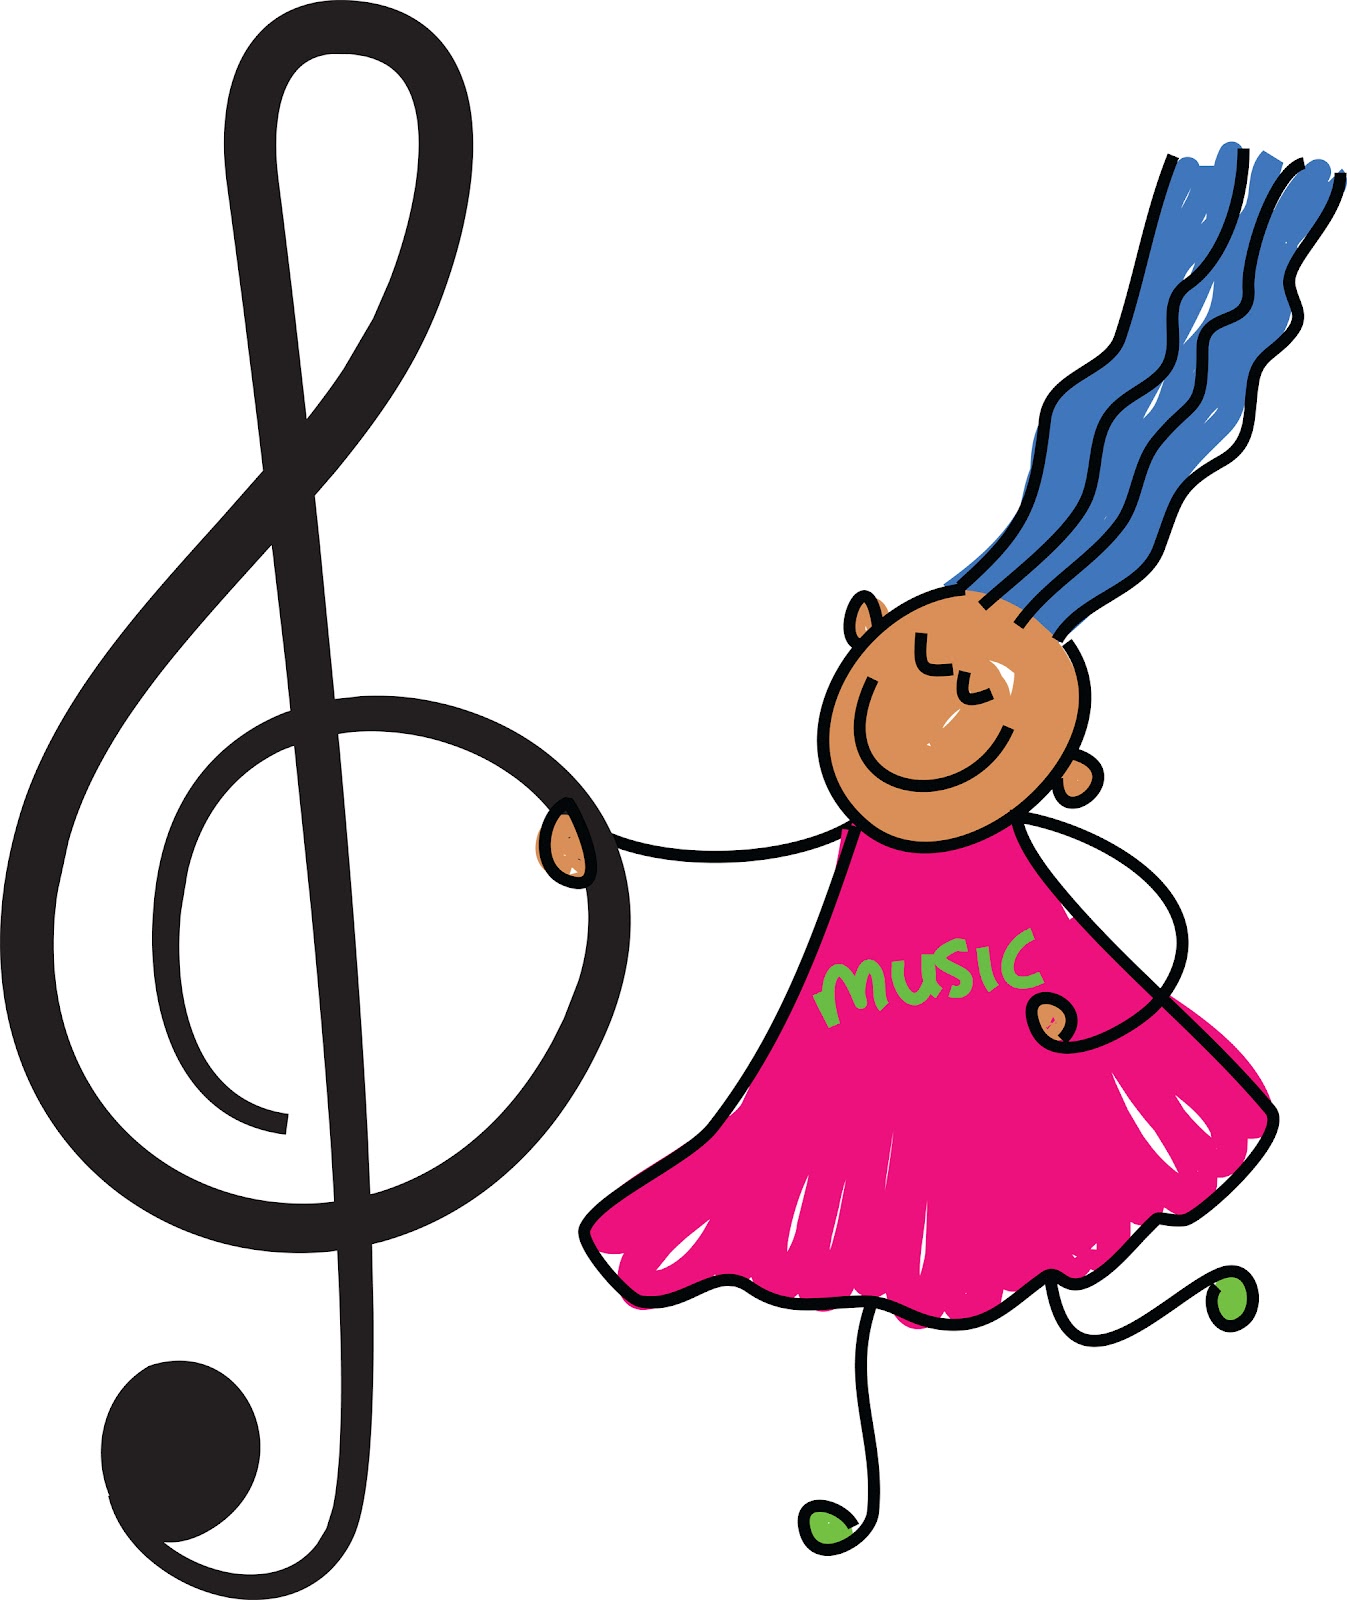 free music education clipart - photo #4